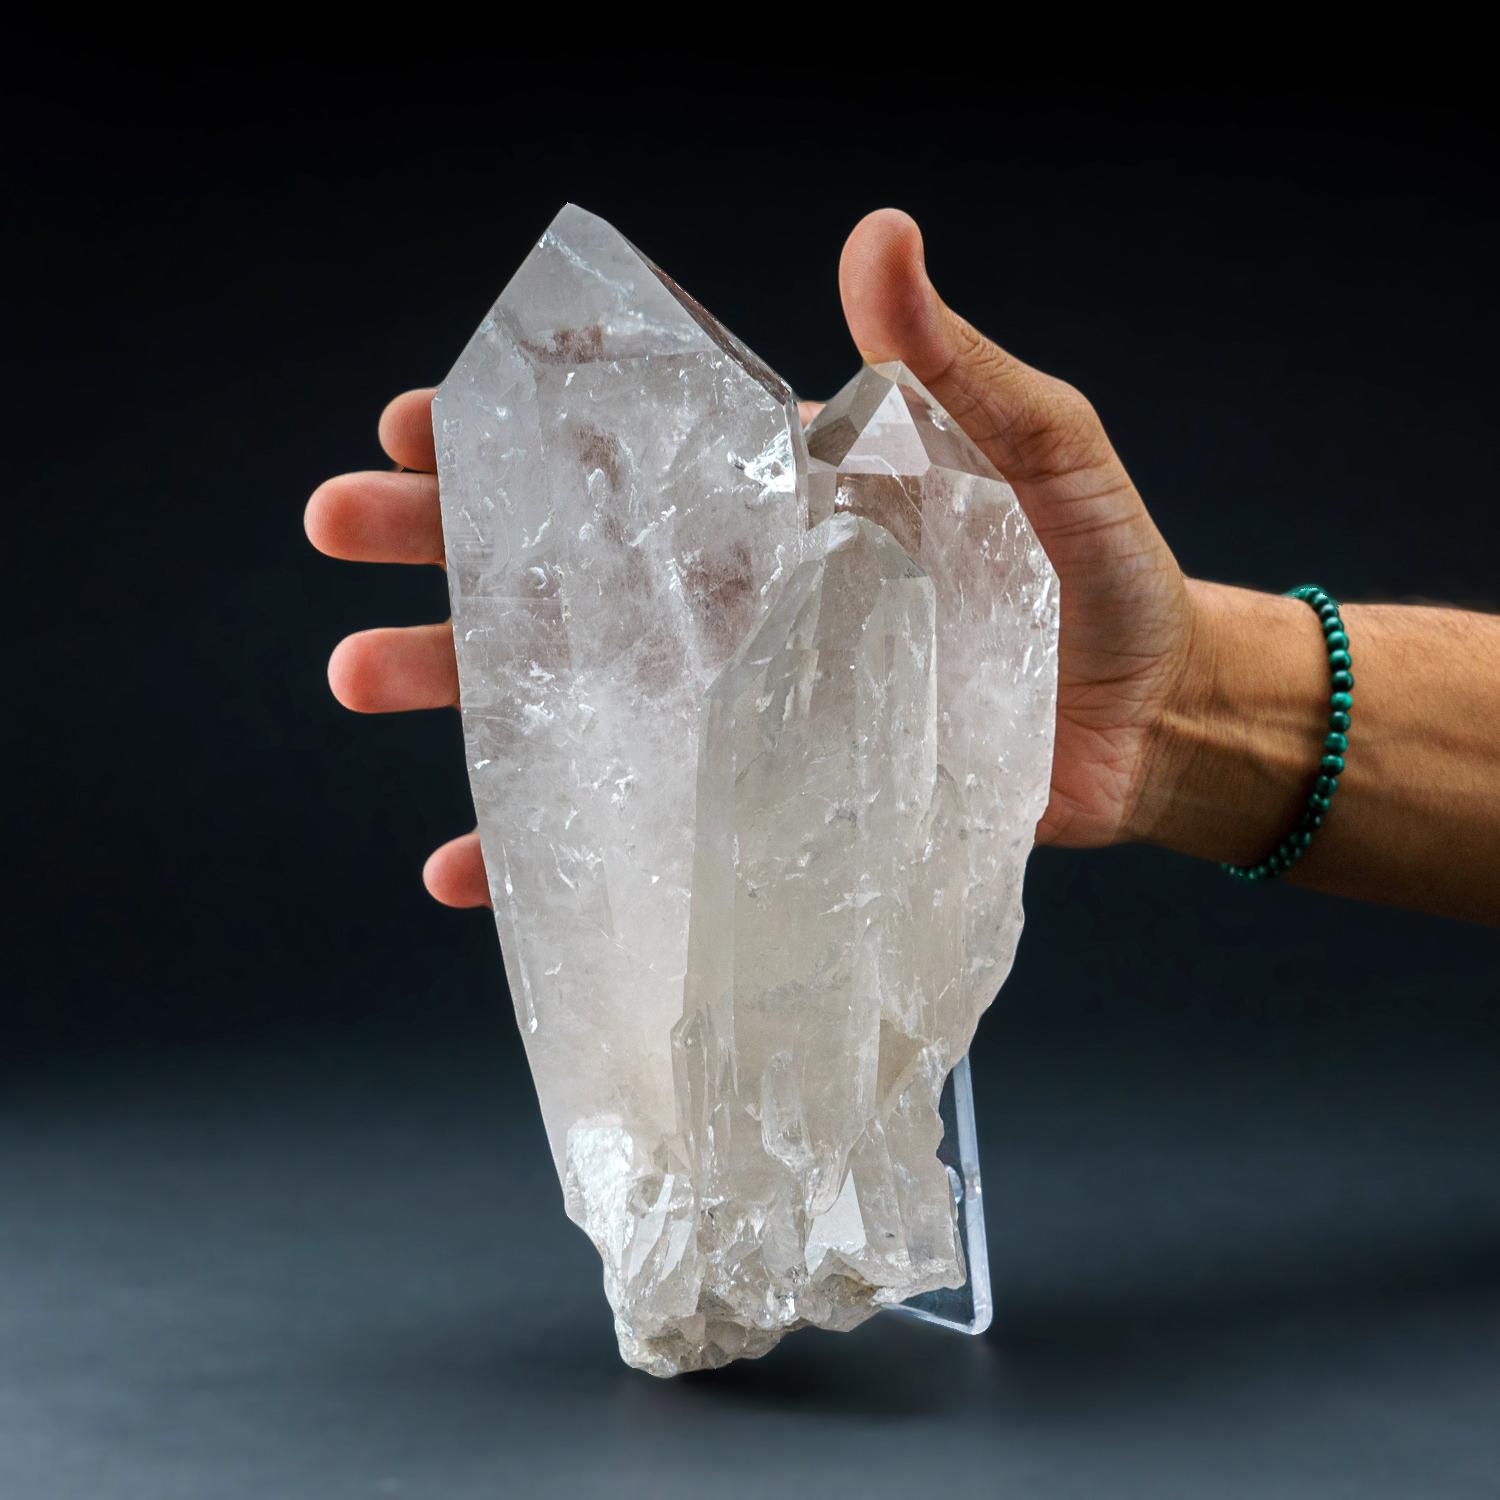 Top quality Brazilian Quartz point Crystal Cluster. This translucent crystal cluster has fully terminated quartz point crystals with lustrous highly reflective faces. 

Clear Quartz encourages clarity of thought and purpose to one’s heart and mind.